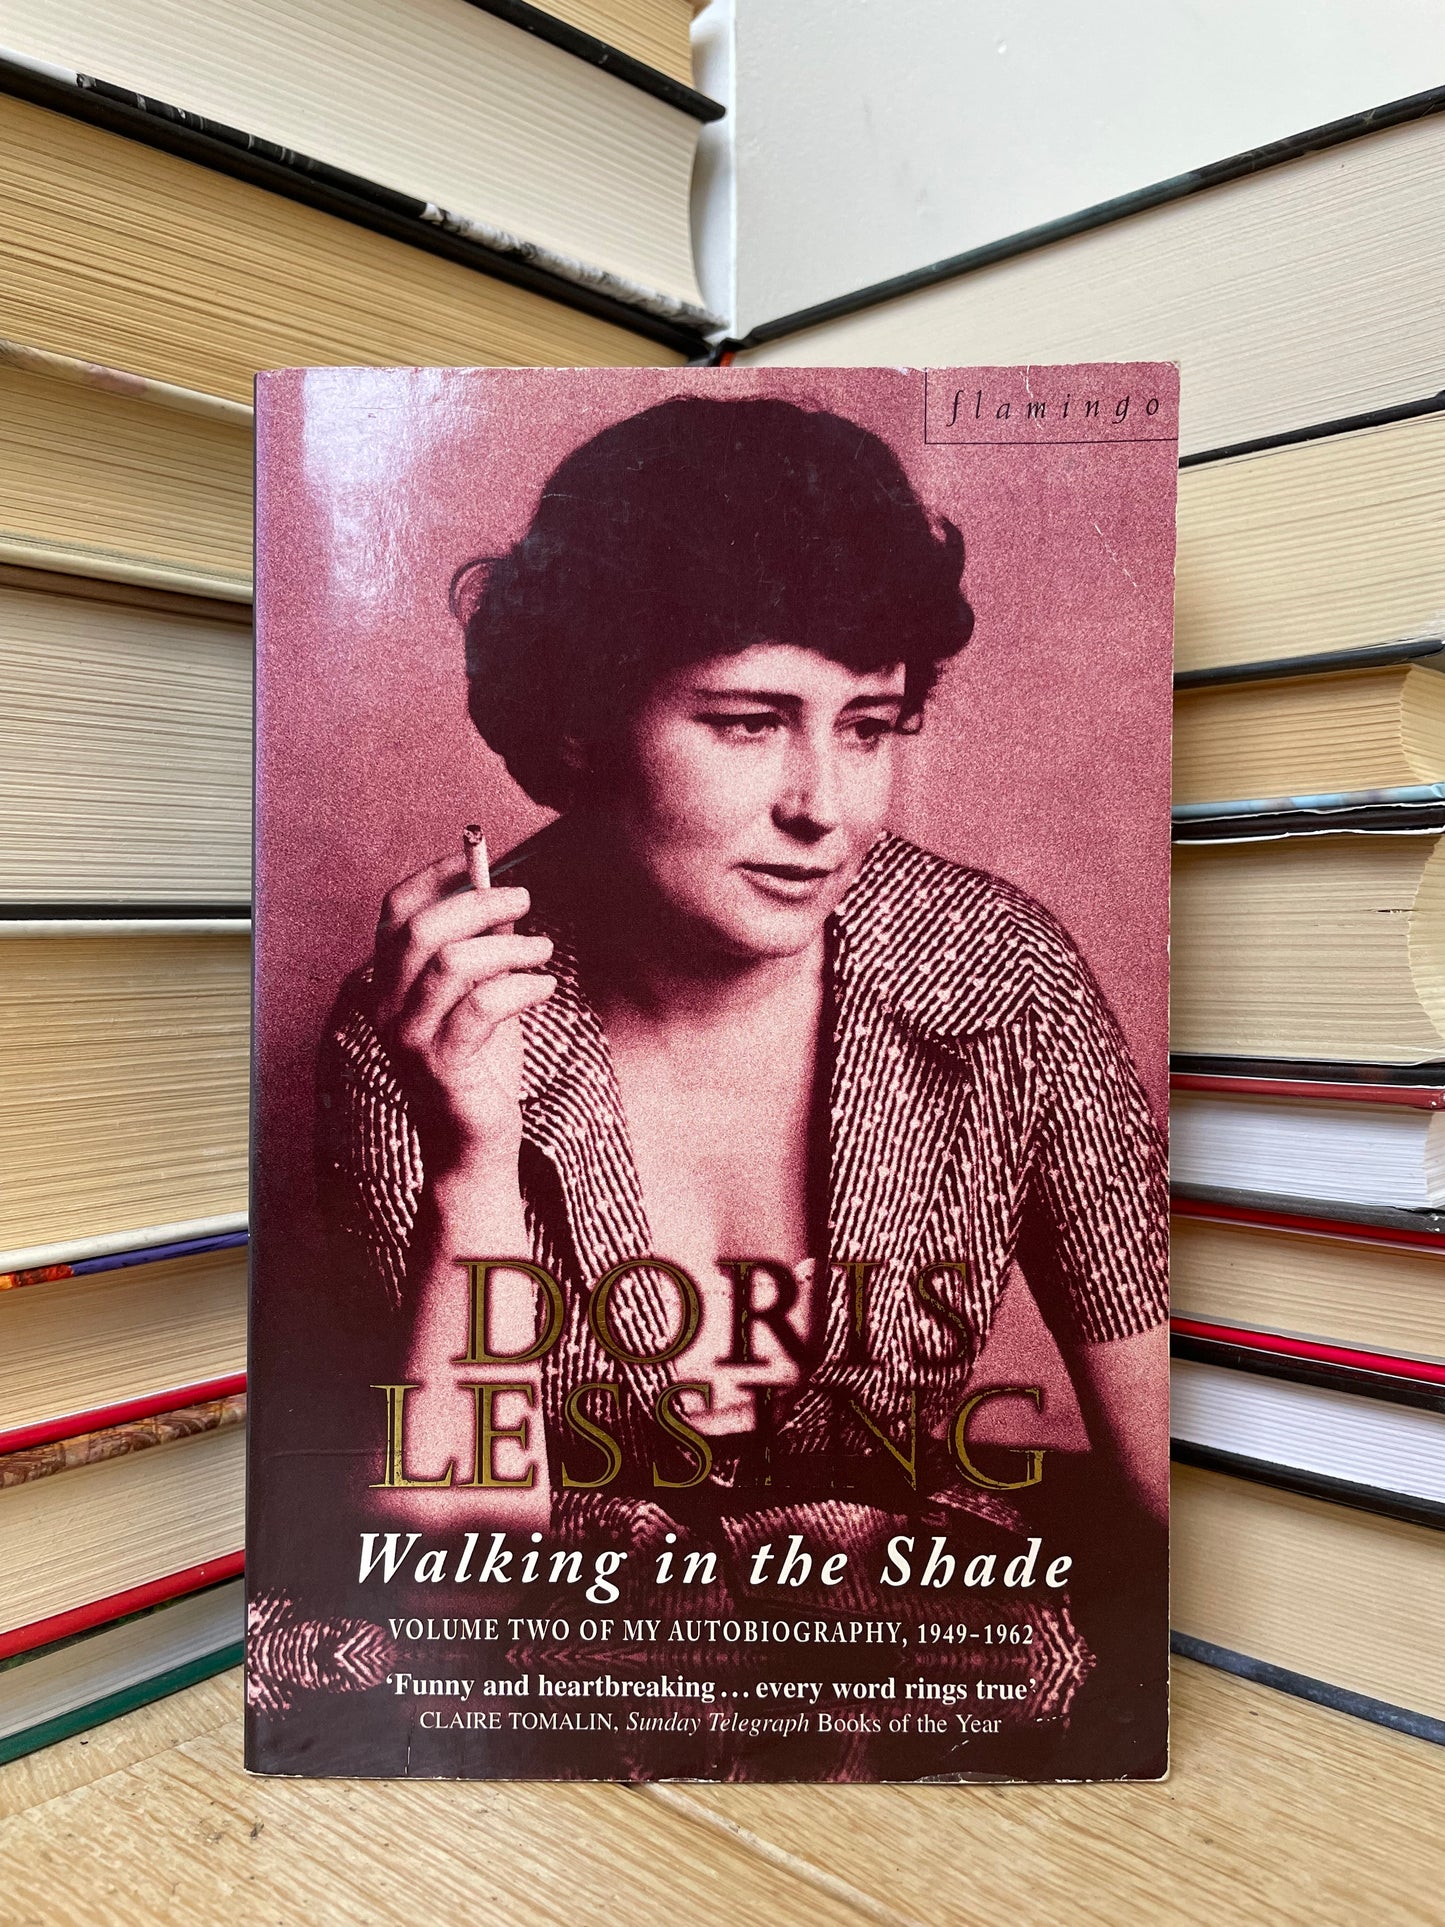 Doris Lessing - Walking in the Shade. Volume two of My Autobiography